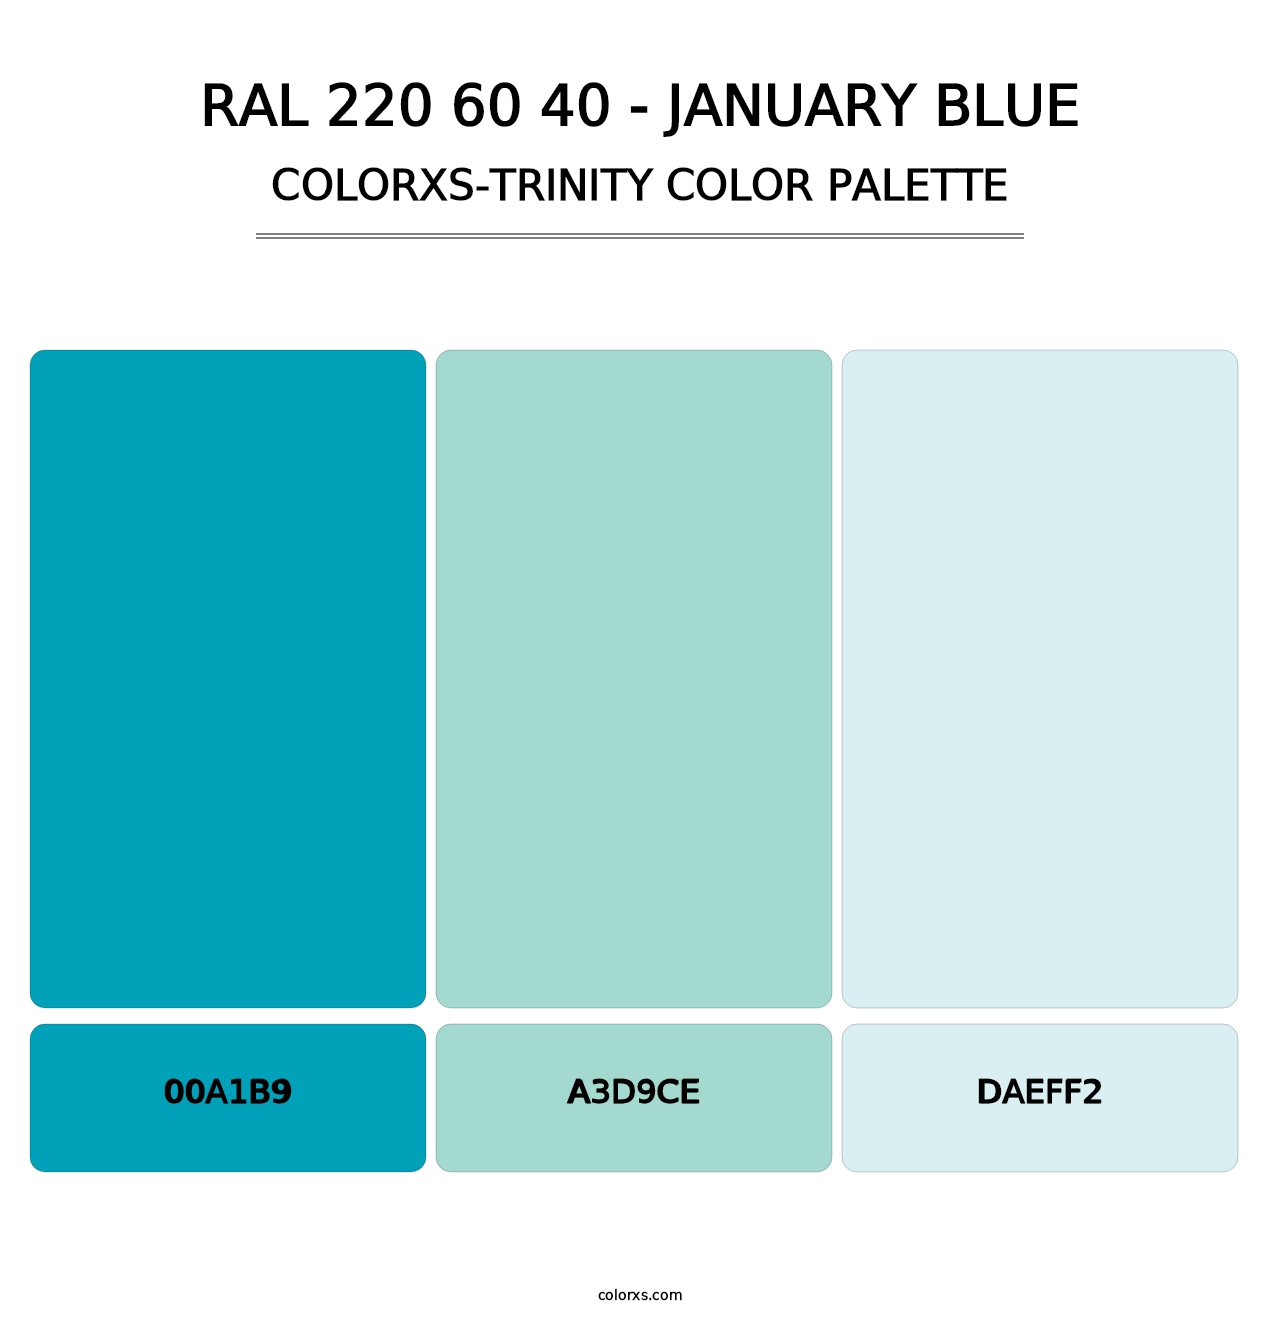 RAL 220 60 40 - January Blue - Colorxs Trinity Palette